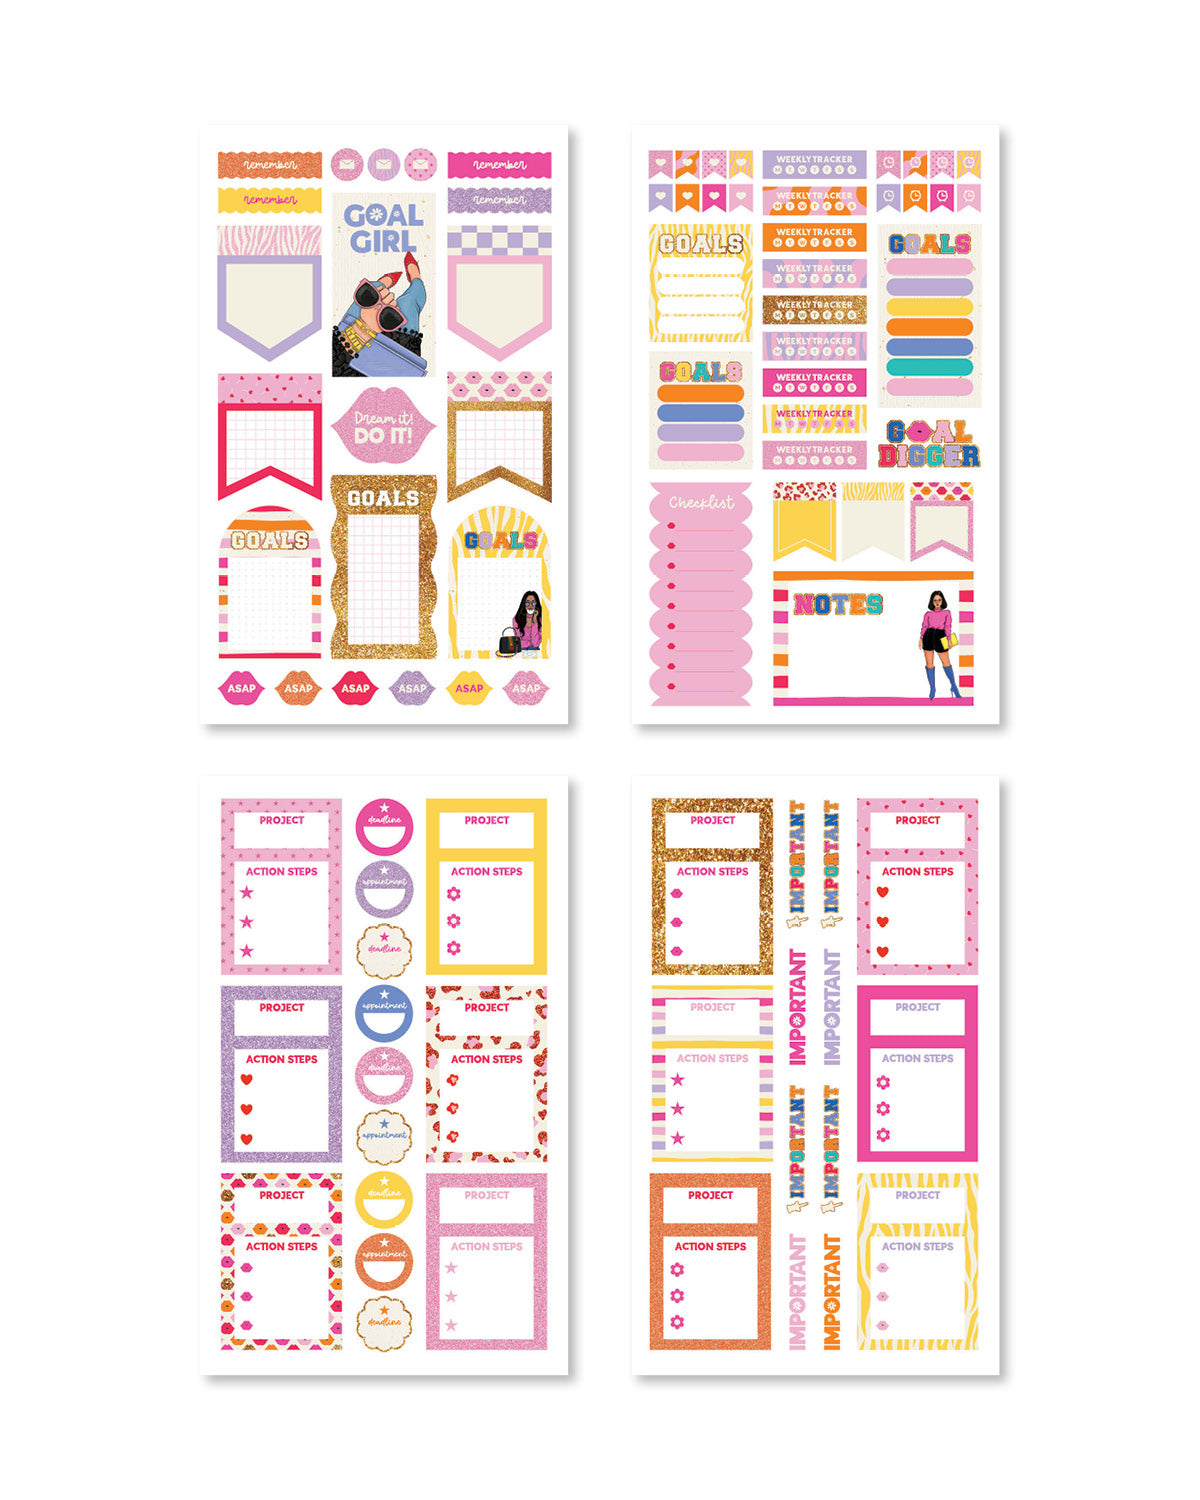 Planner Stickers Book - Sugary Gal Minis - Paper House  Planner stickers,  Planner sticker book, Mini sticker books